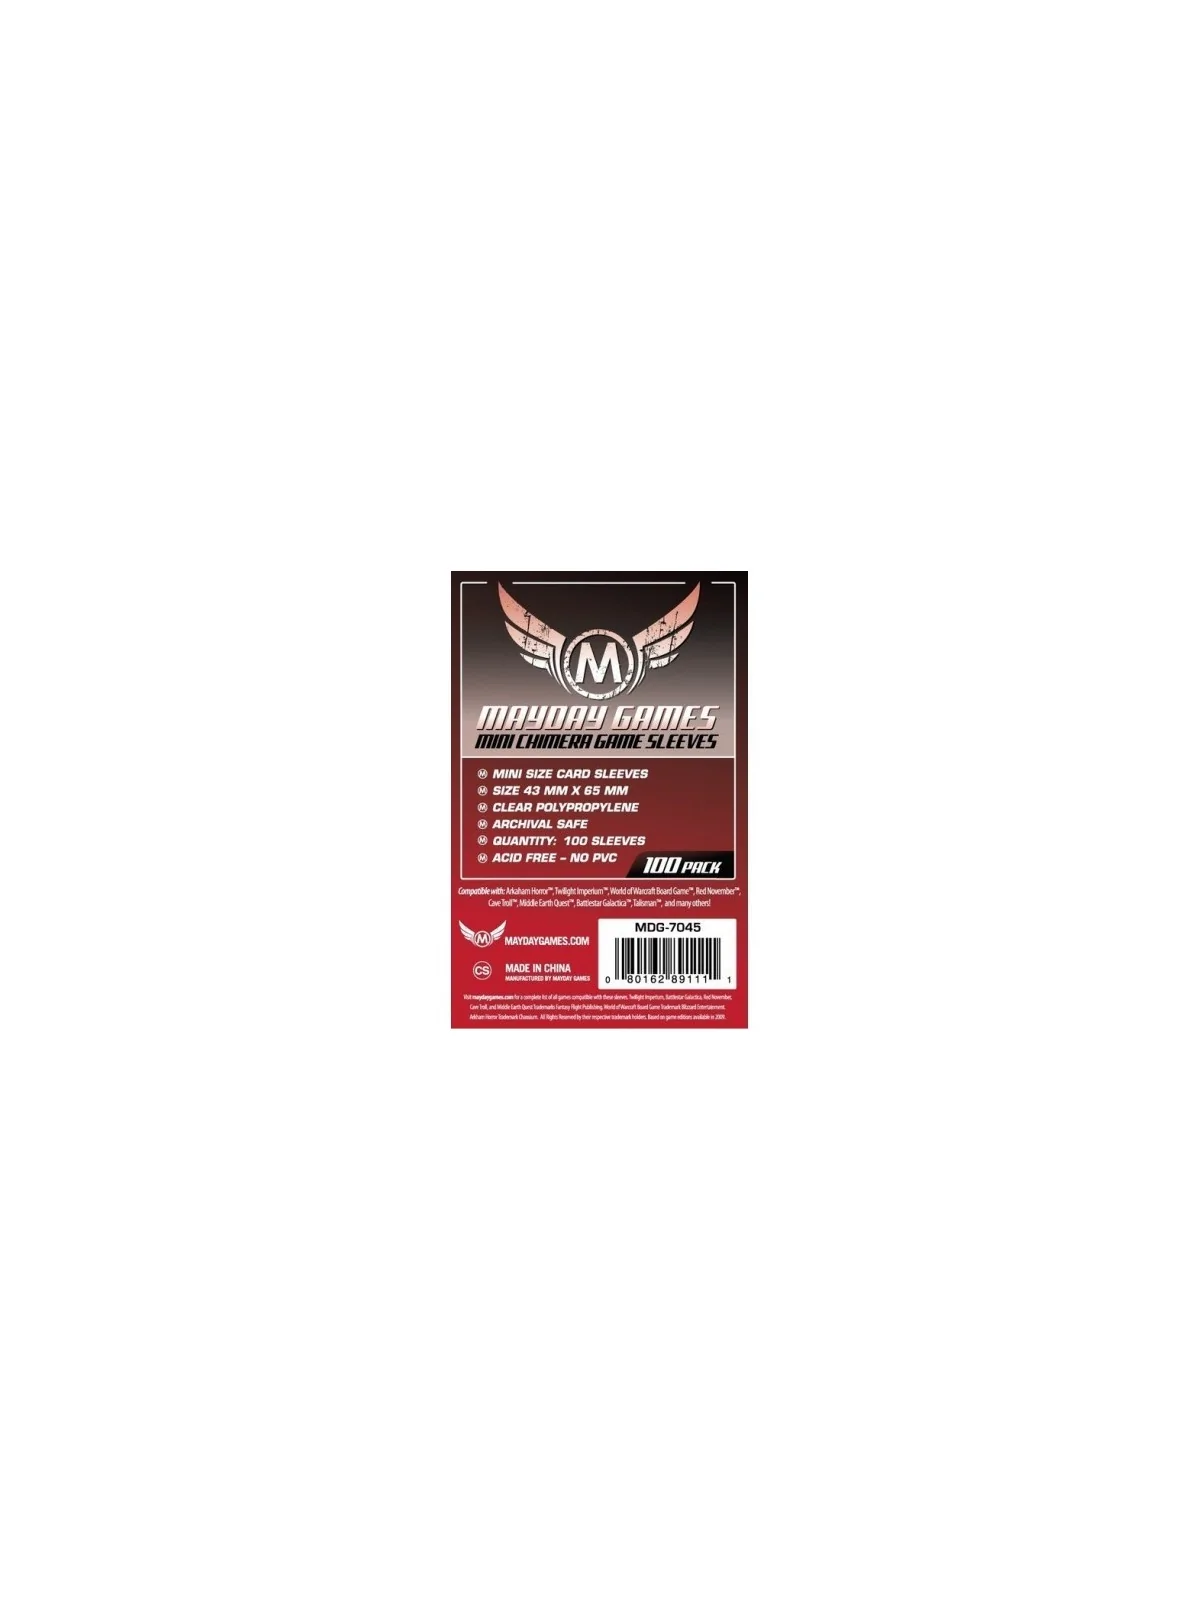 Comprar [7045] Mayday Games Mini Chimera Game Sleeves Red (Pack of 100